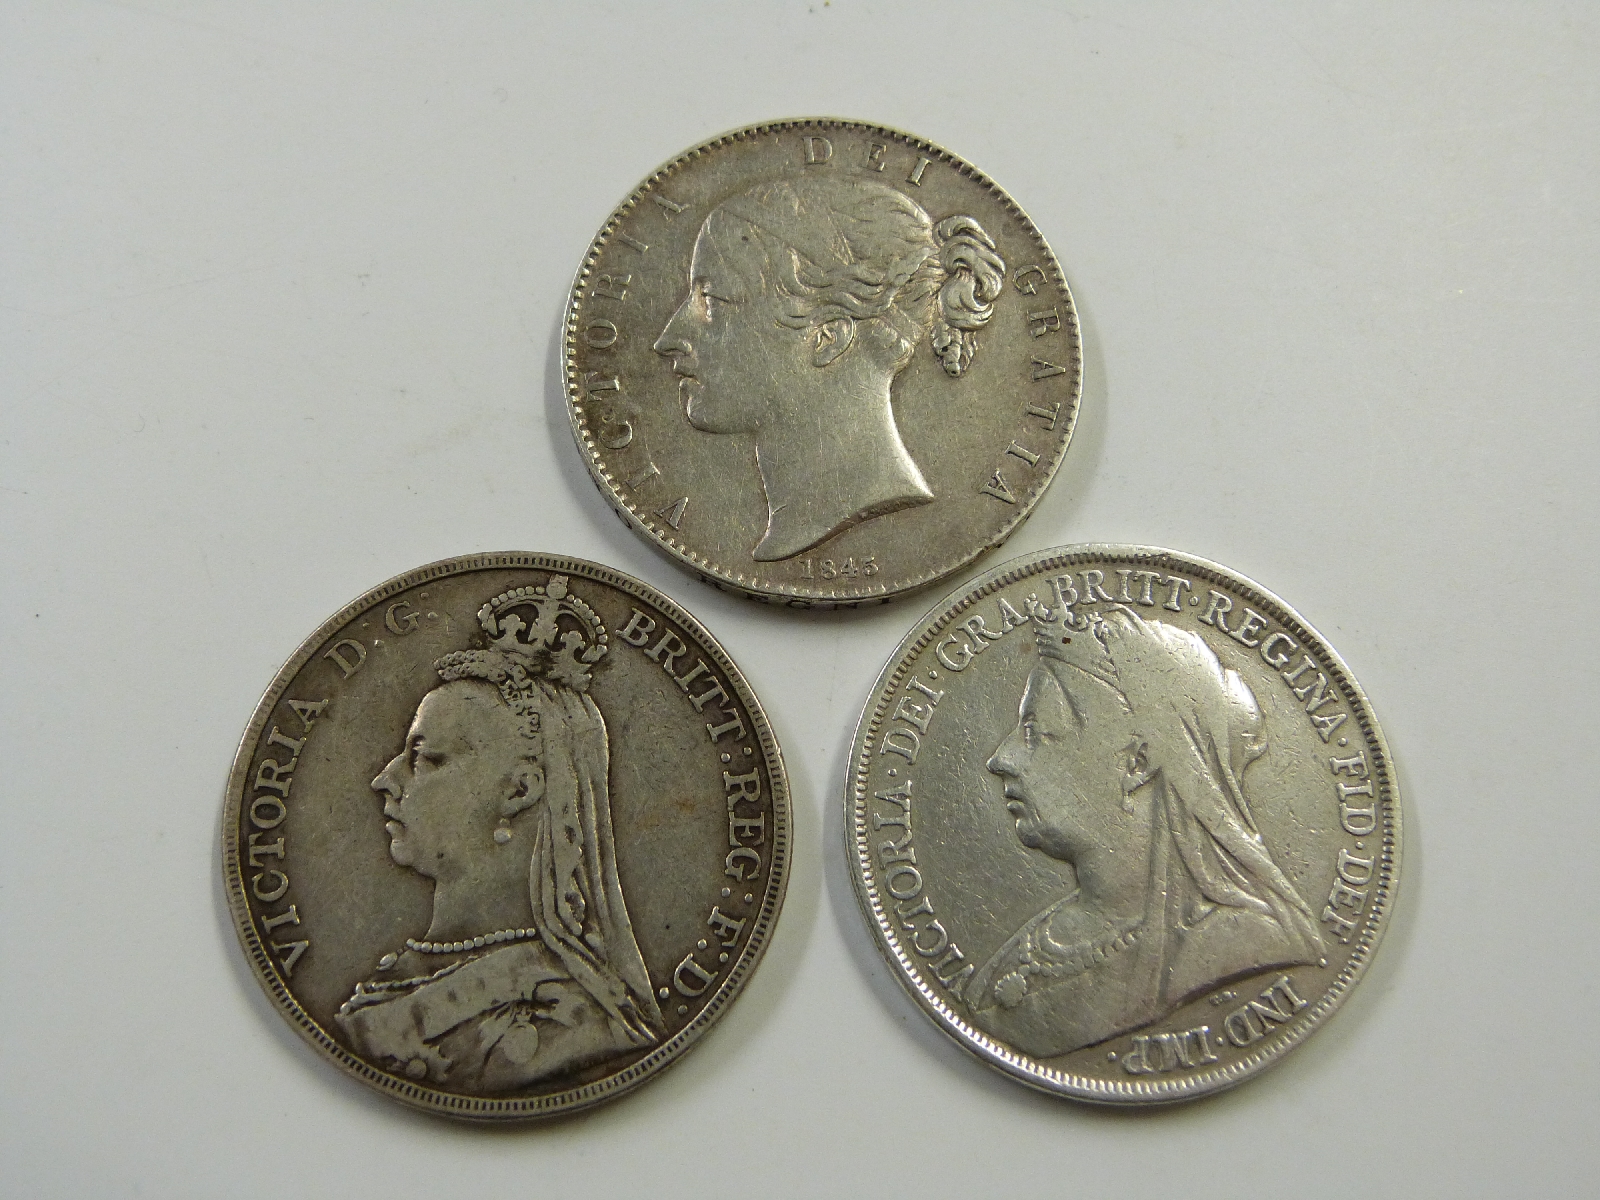 A trio of Victorian crowns to include young head 1845 VIII with cinquefoil, 1893 veiled head and